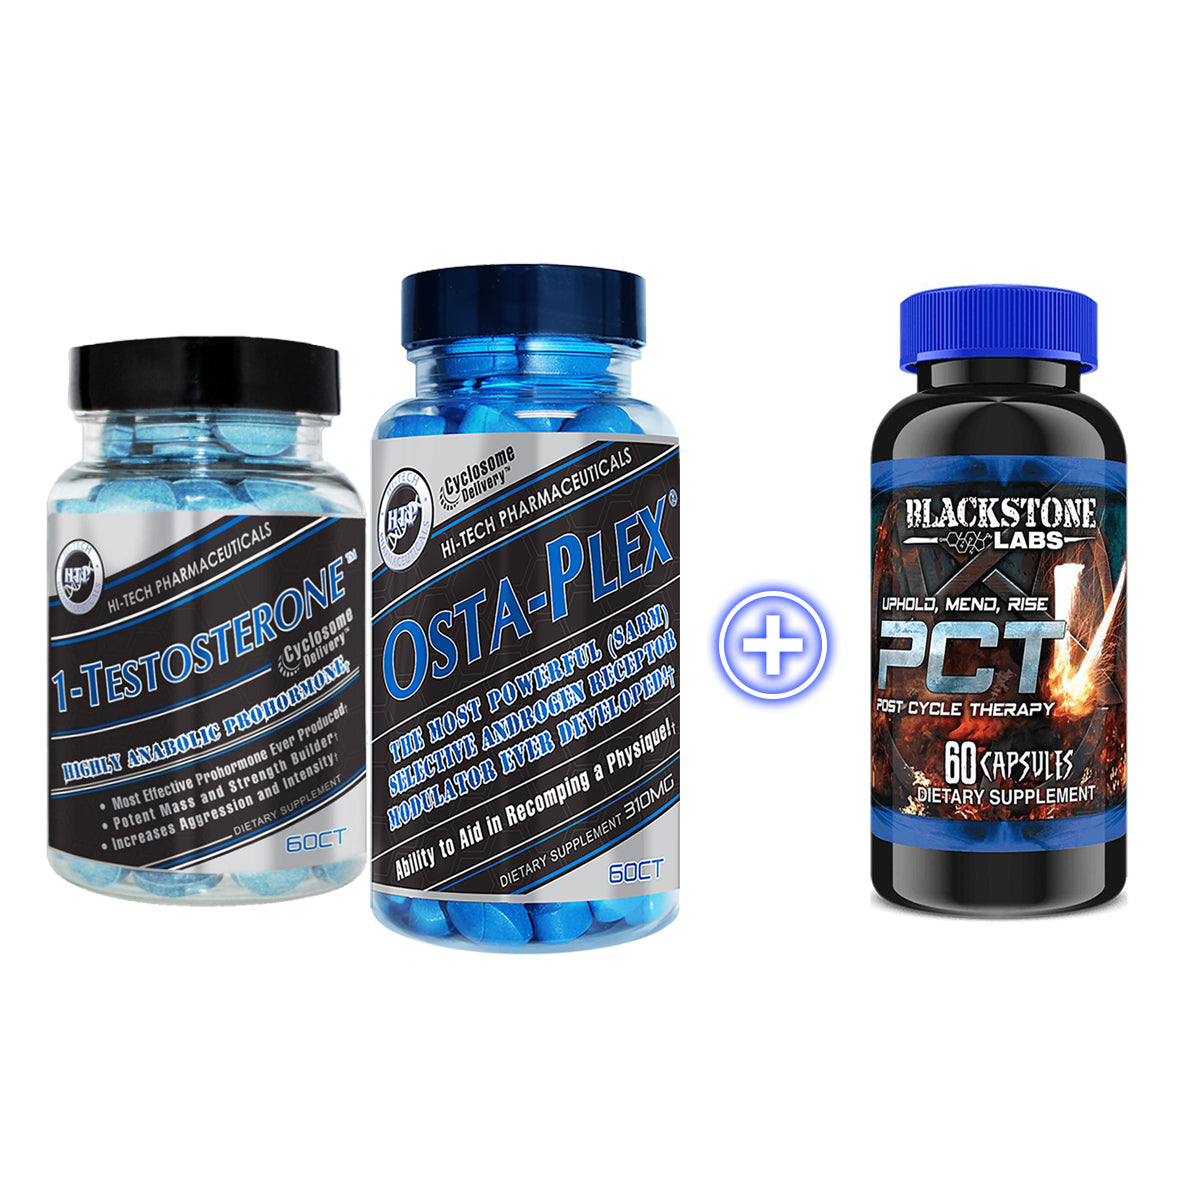 Extreme-Lean Mass & Strength, Prohormone Stack